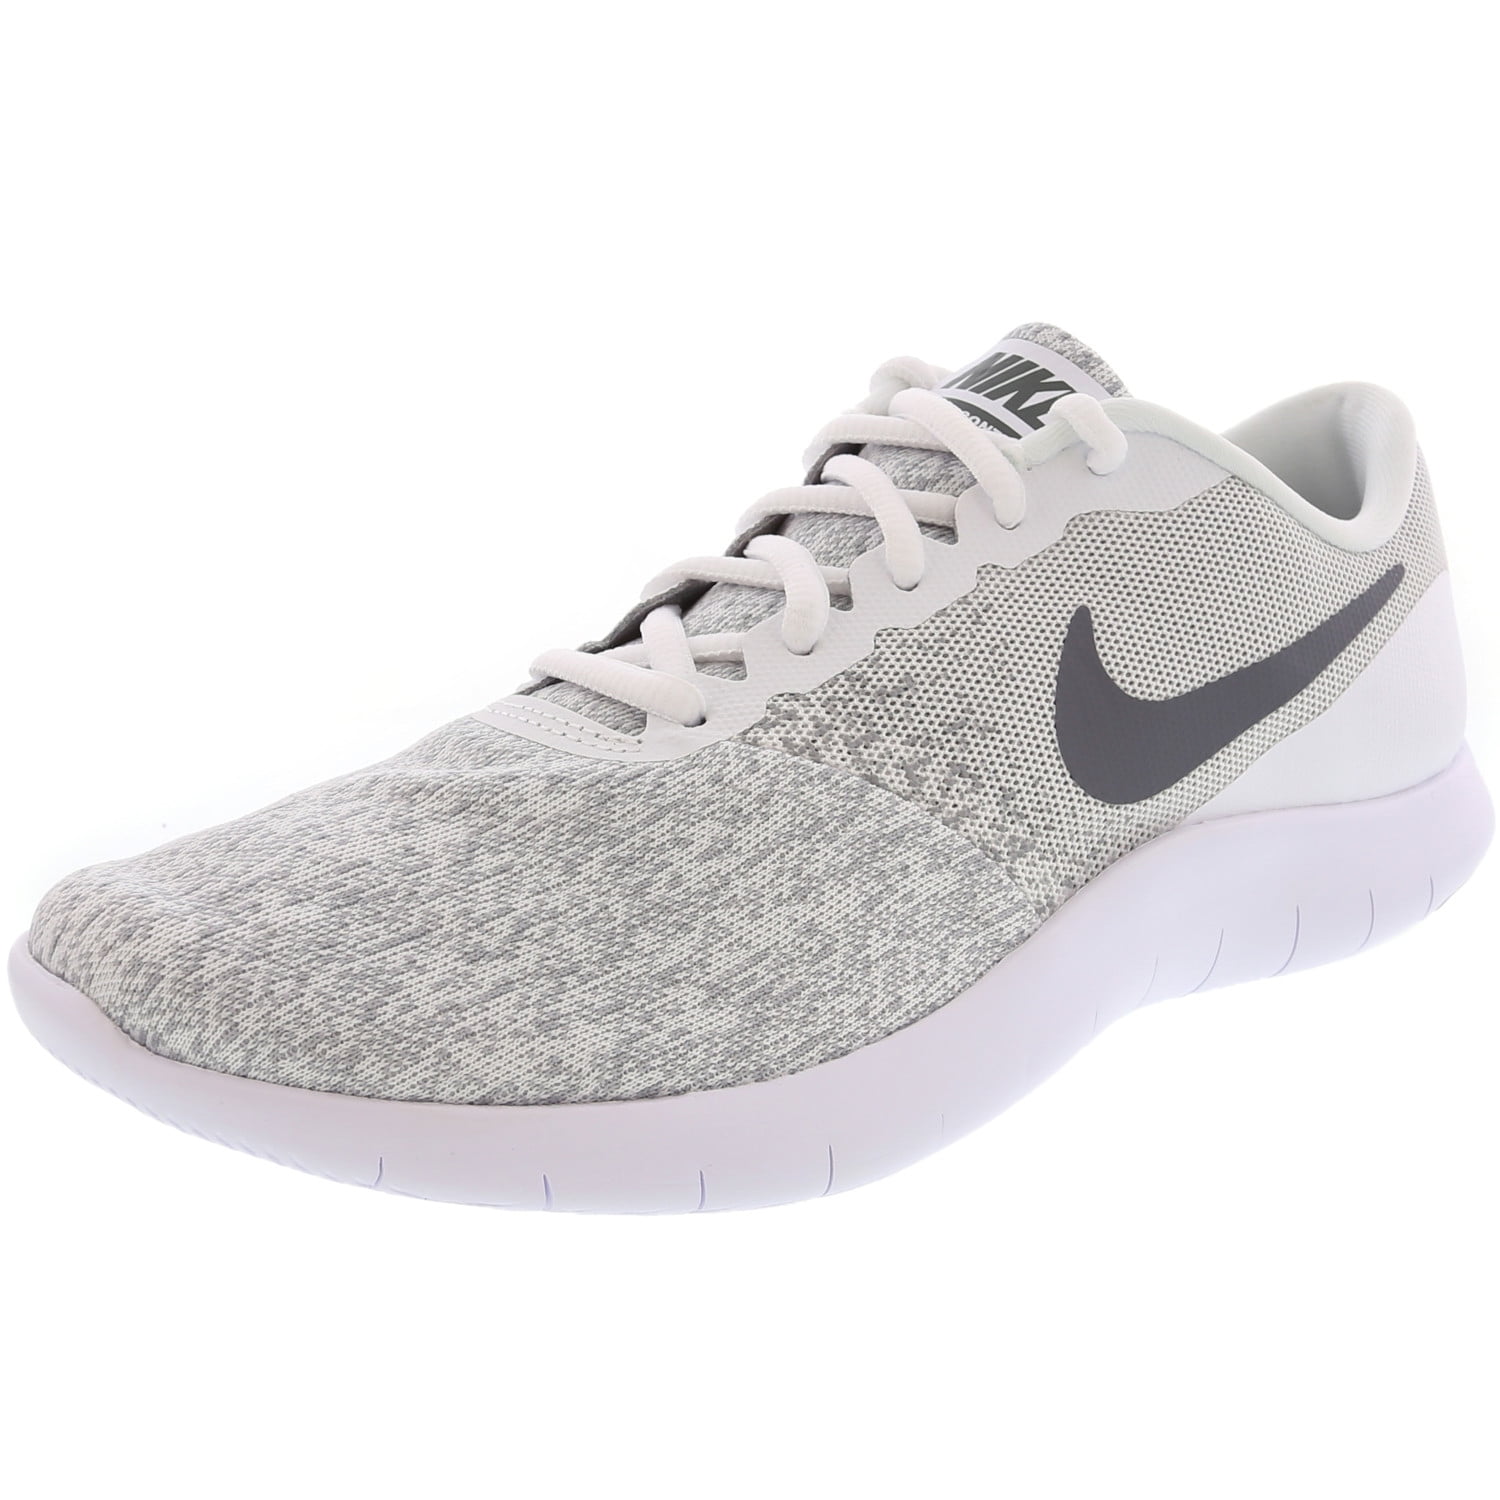 Nike - Nike Women's Flex Contact White / Cool Grey Ankle-High Running ...